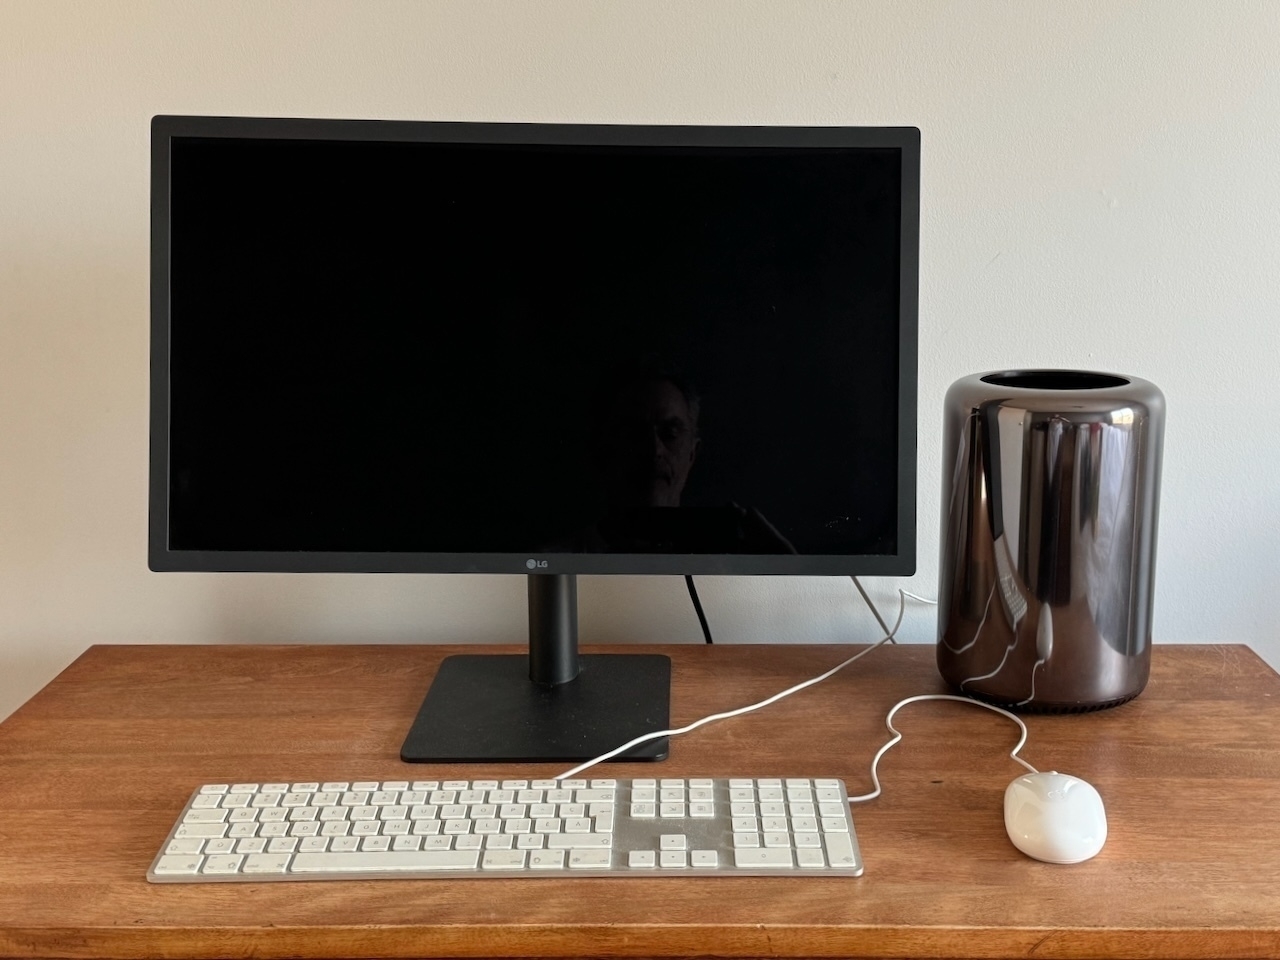 Auto-generated description: A computer setup with a black monitor, white keyboard, and mouse on a desk next to a brown speaker.